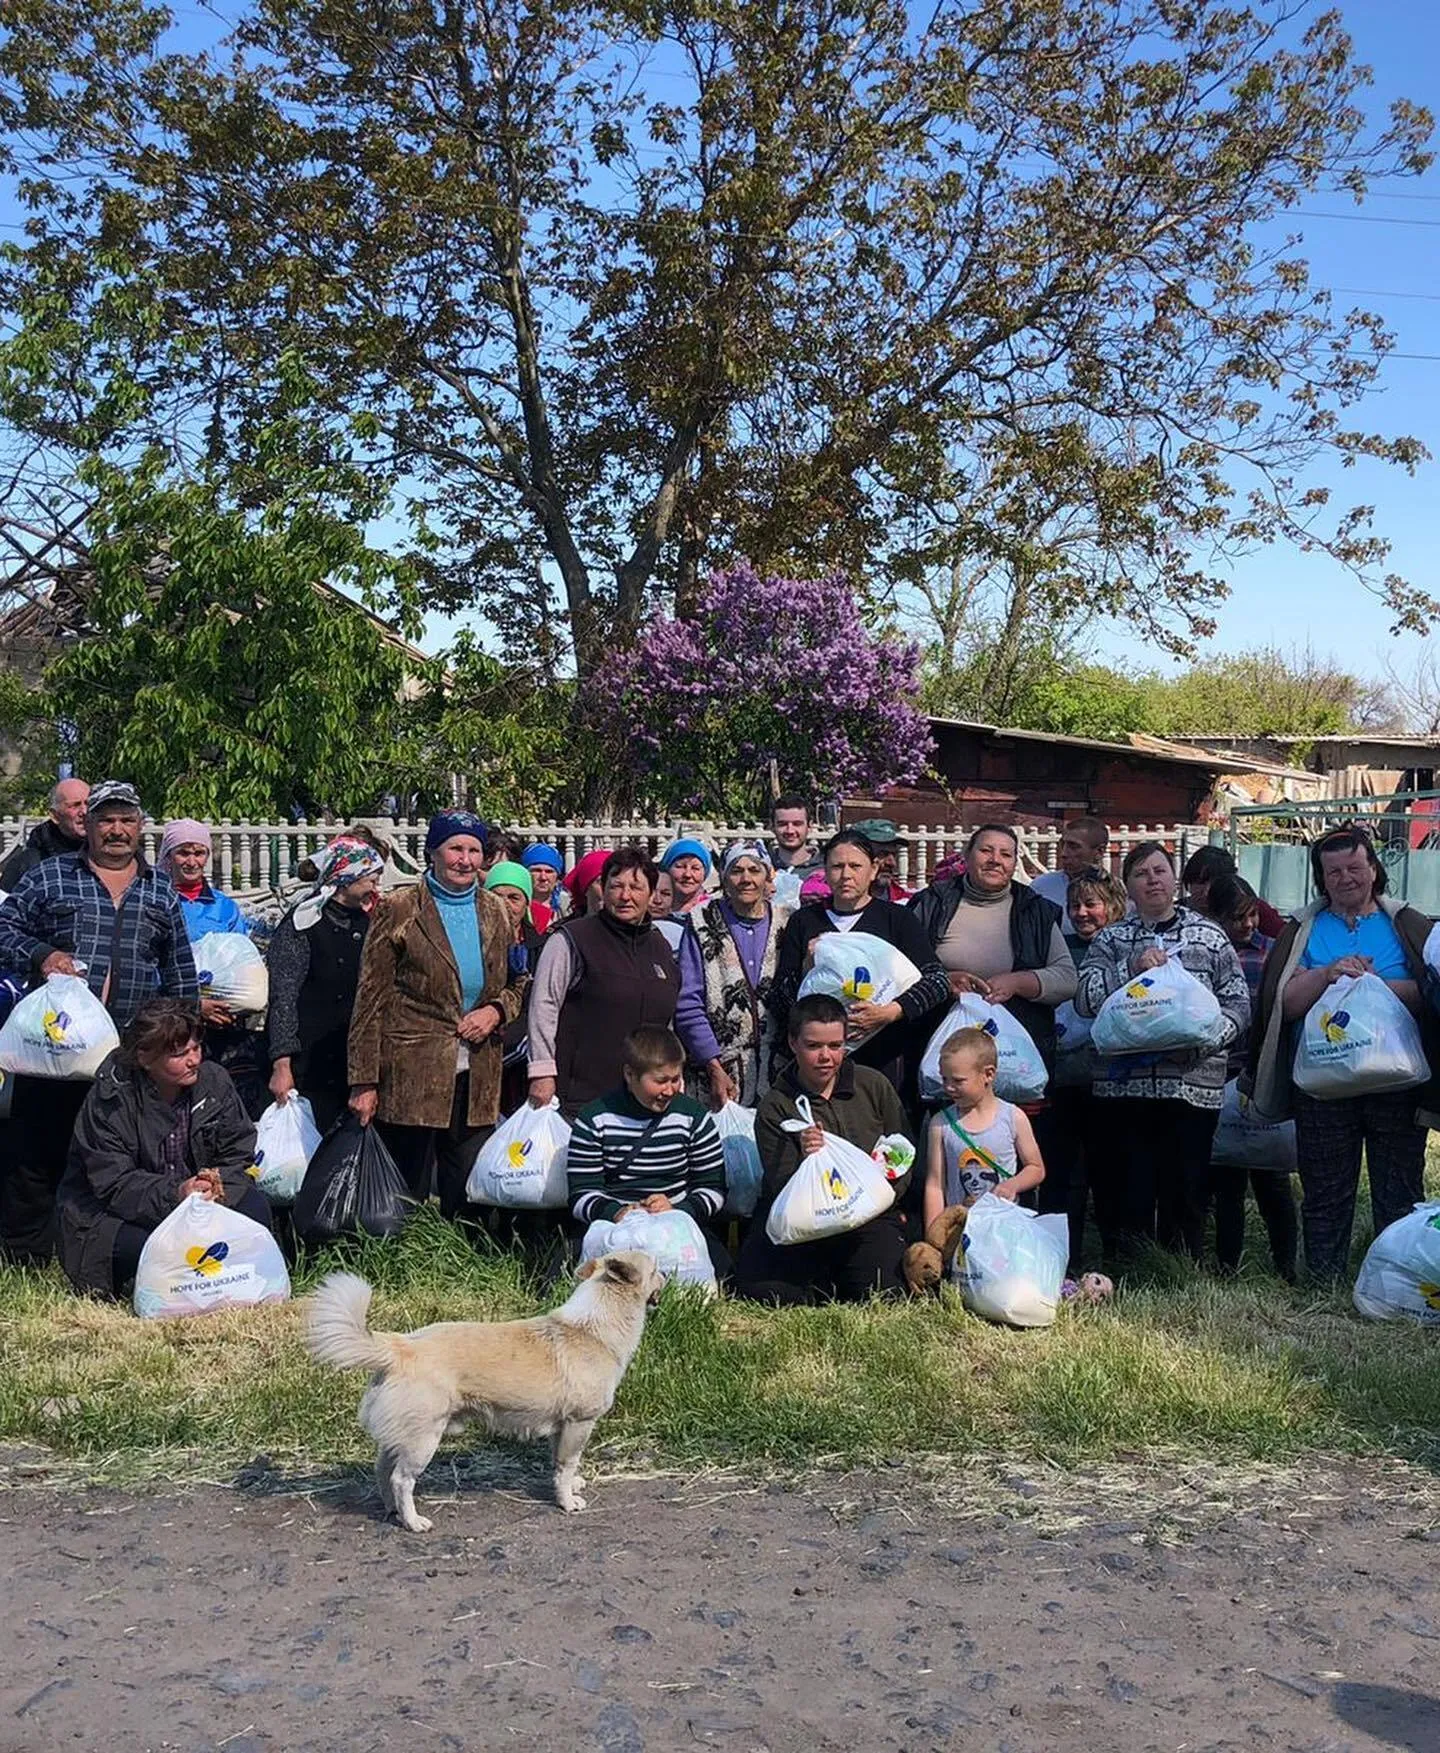 a group of people holding bags with a dog standing next to them.